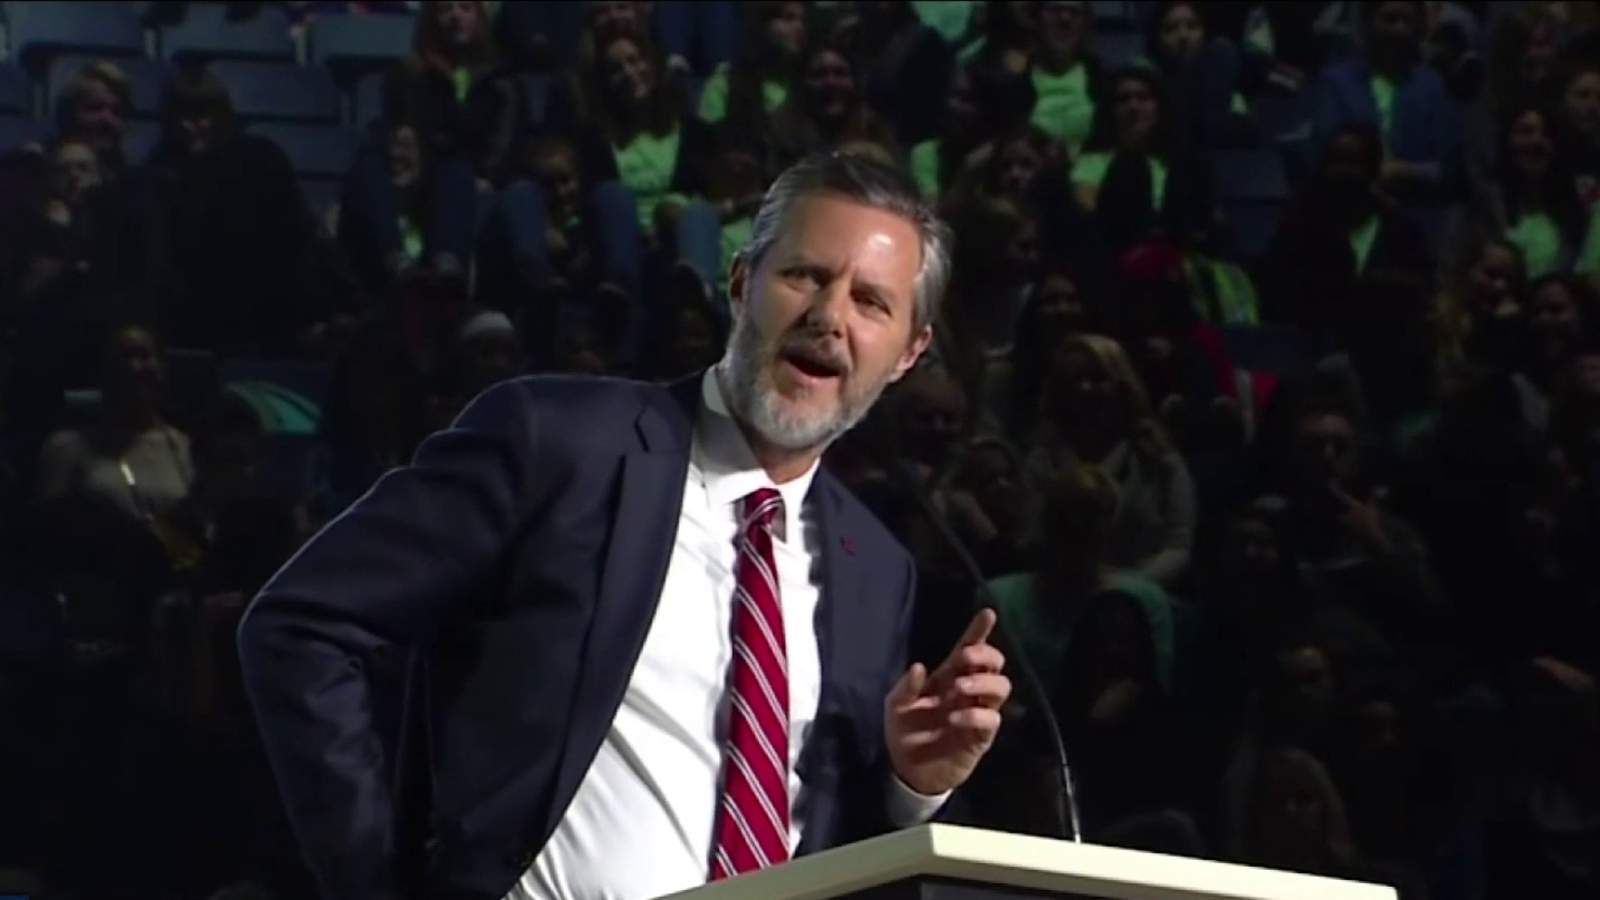 Liberty University bans employees from talking to Jerry Falwell Jr. about university relations